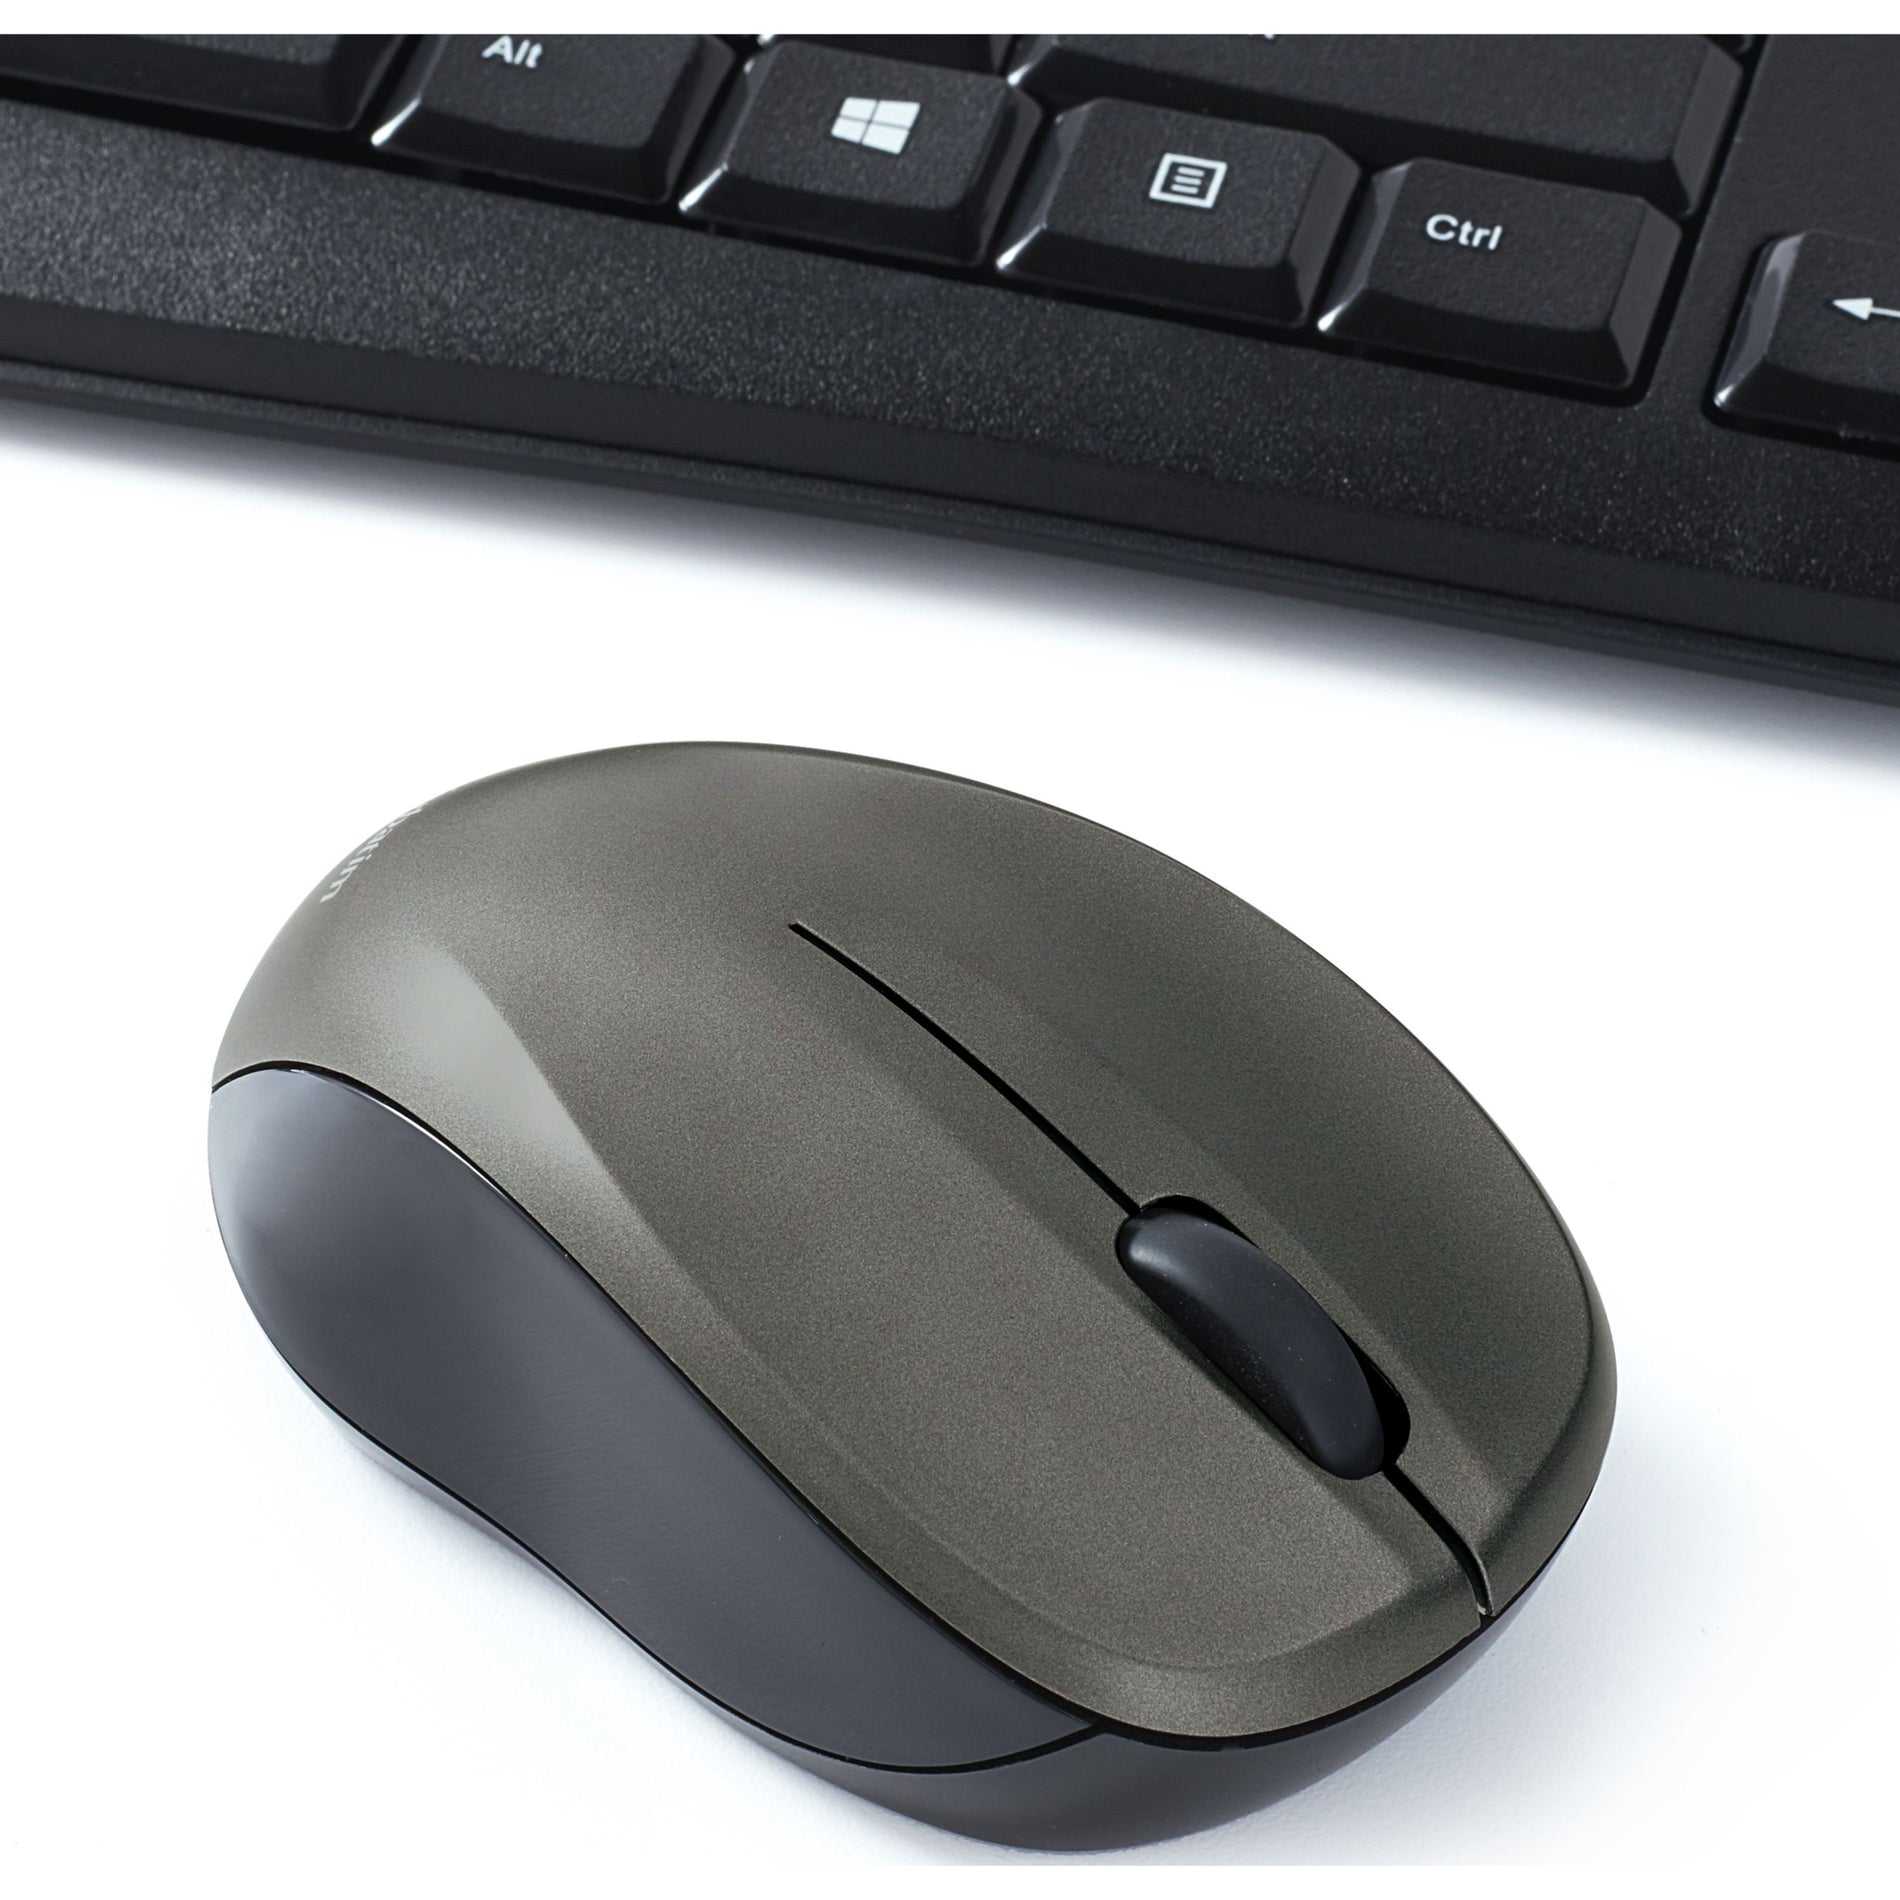 Verbatim 99779 Silent Wireless Mouse and Keyboard - Black, Nano Receiver, 1-Year Limited Warranty